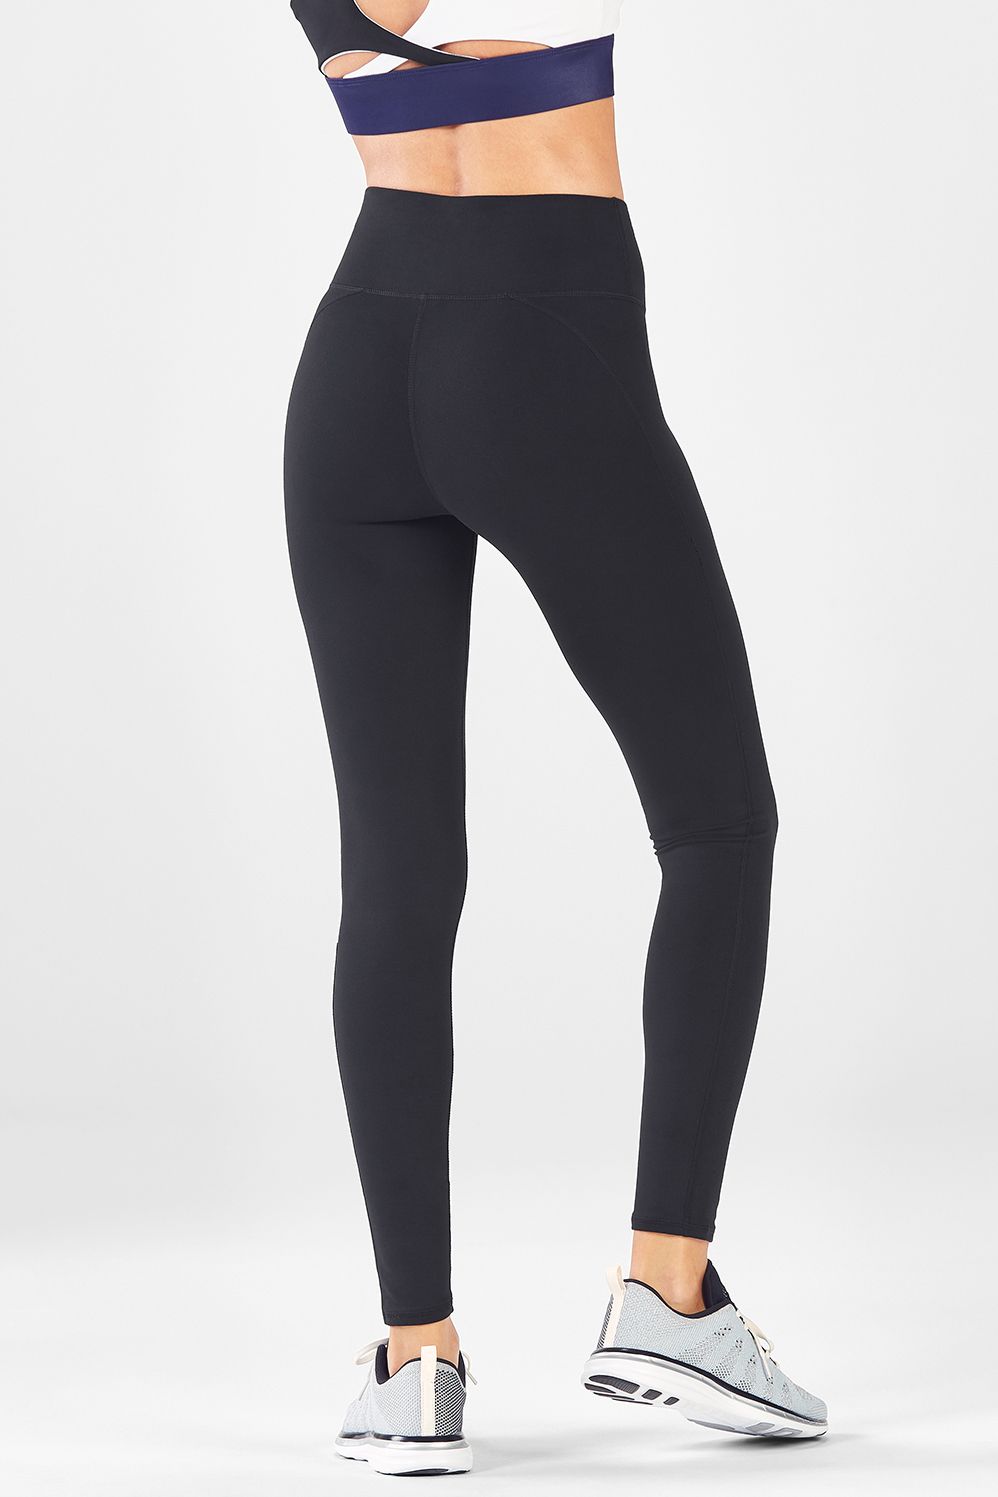 Fabletics Tight High-Waisted Solid Powerhold® Legging Womens Black Size XXS | Fabletics